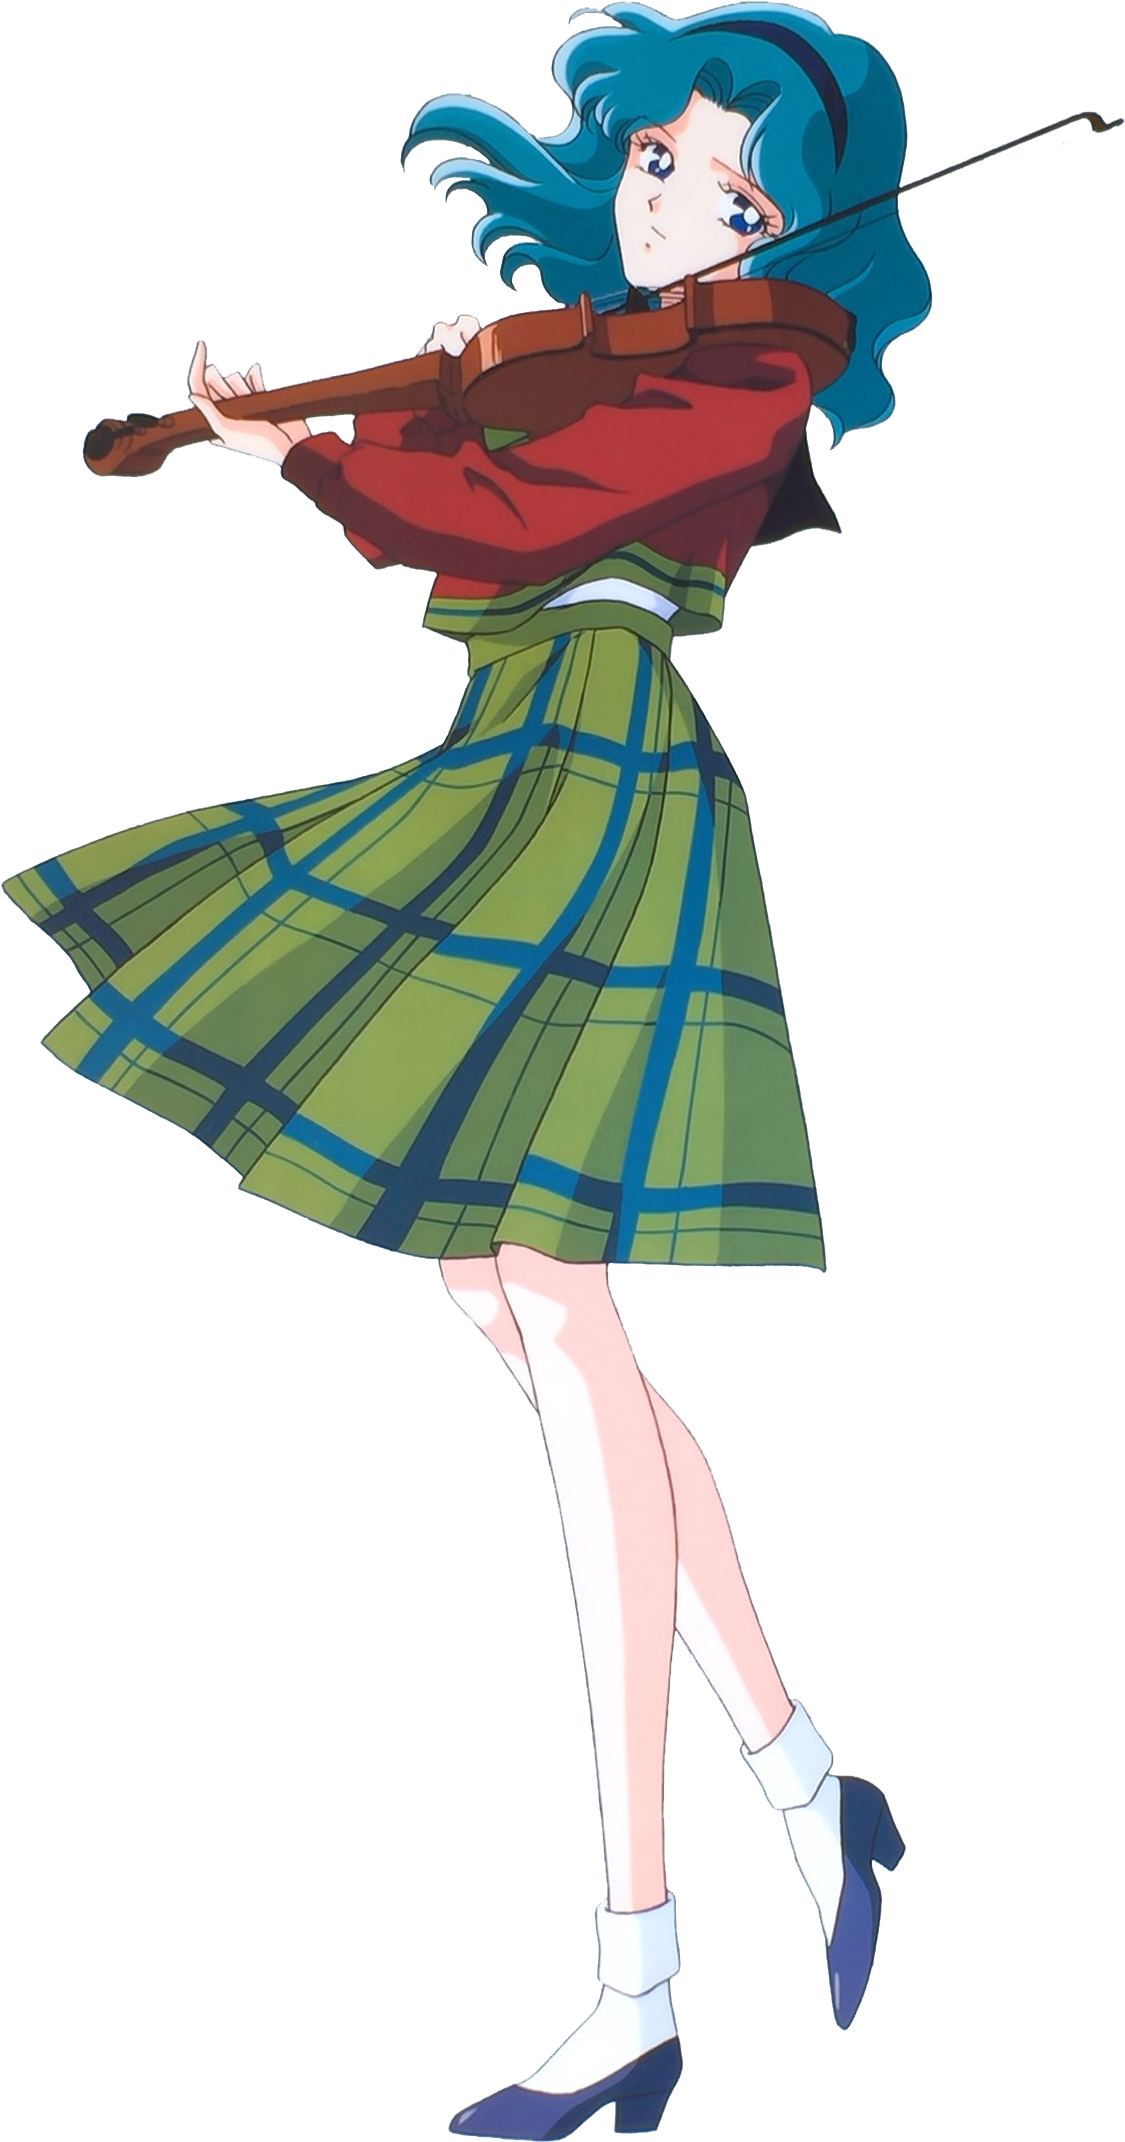 A Cartoon Of A Woman In A Green And Blue Plaid Dress